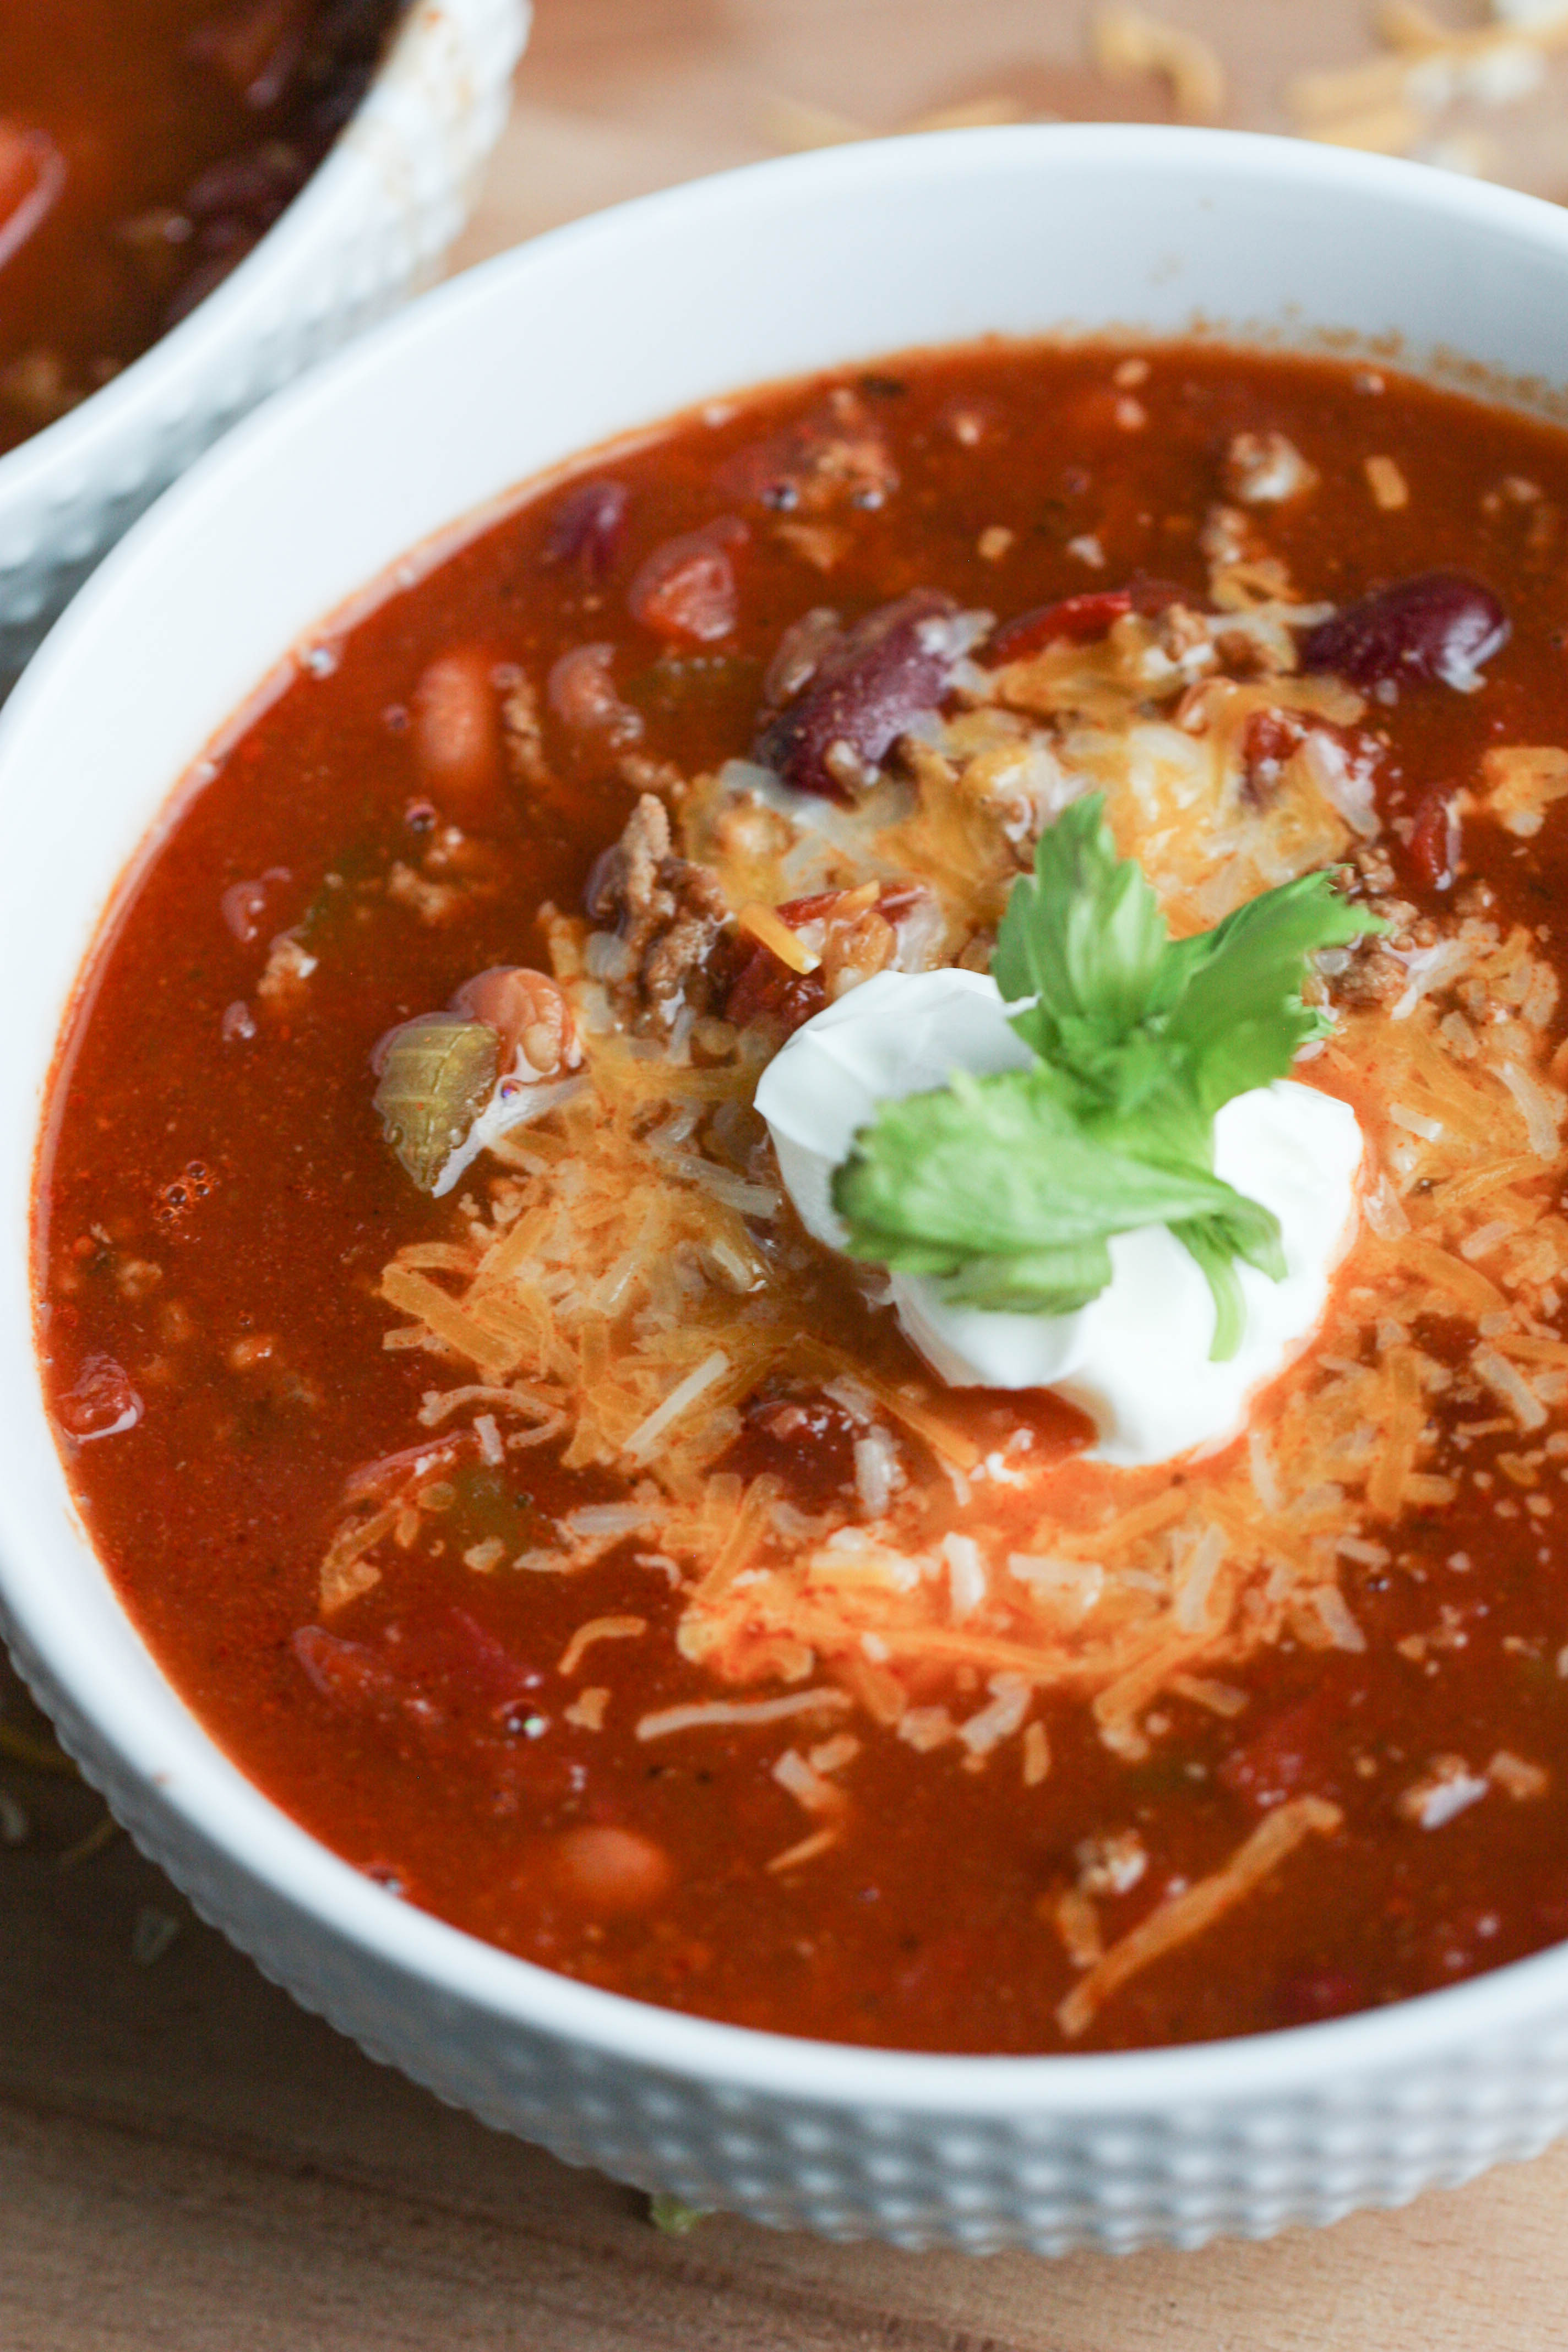 Wendy’s Copycat Chili in a bowl